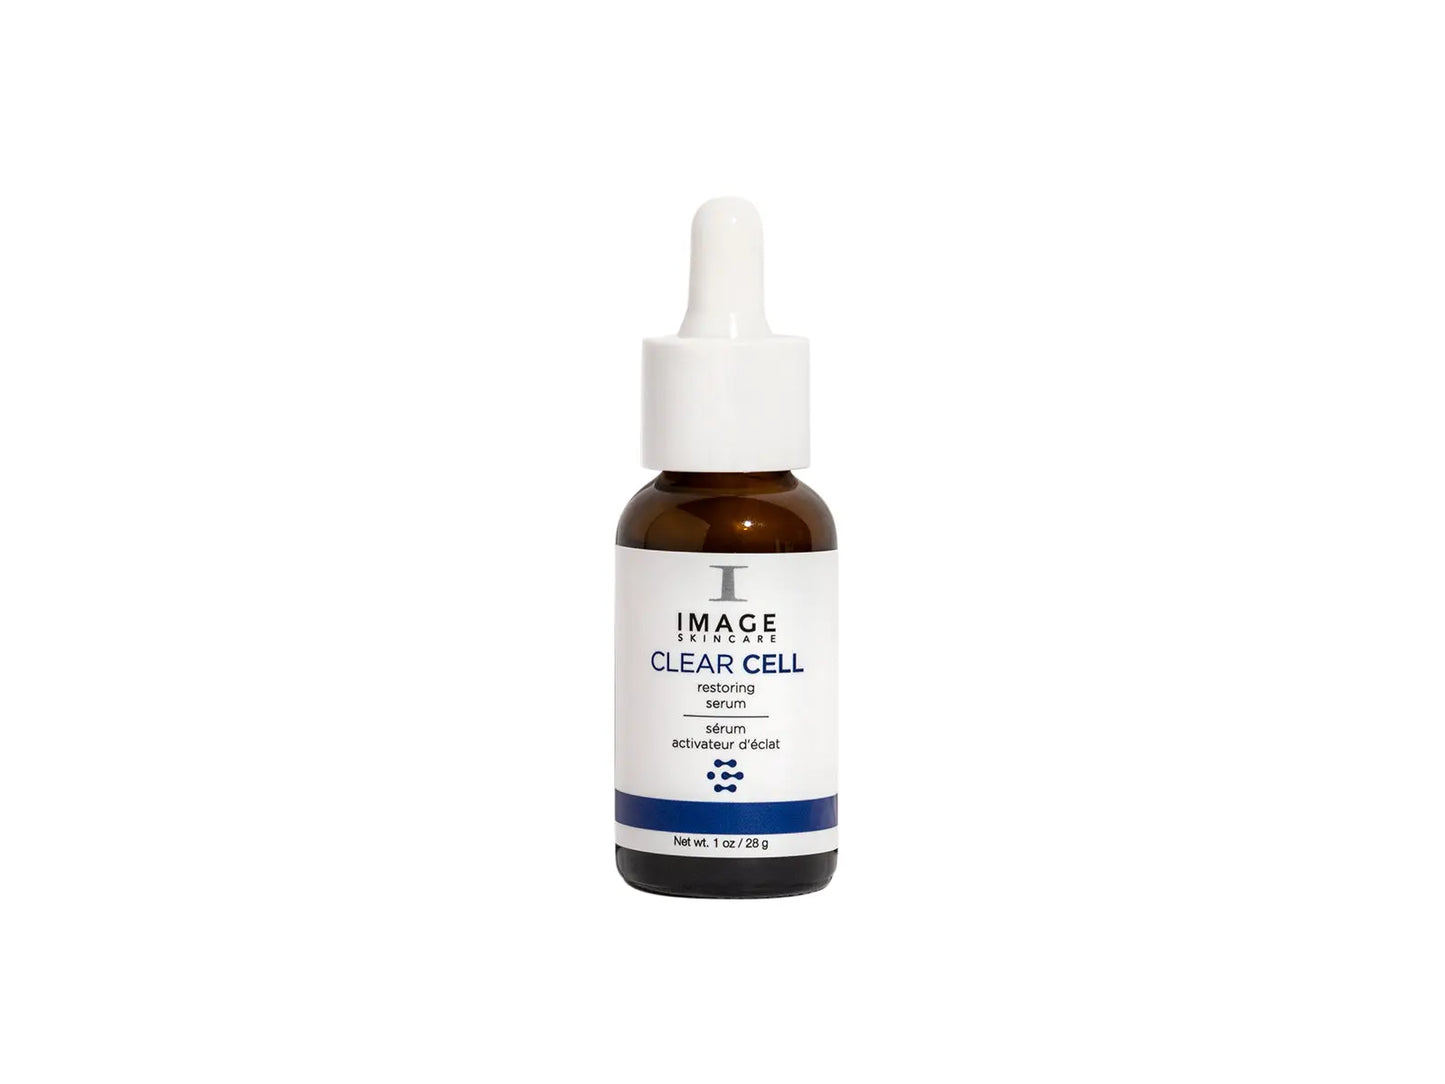 Clear Cell Restoring Serum 28gr. IMAGE